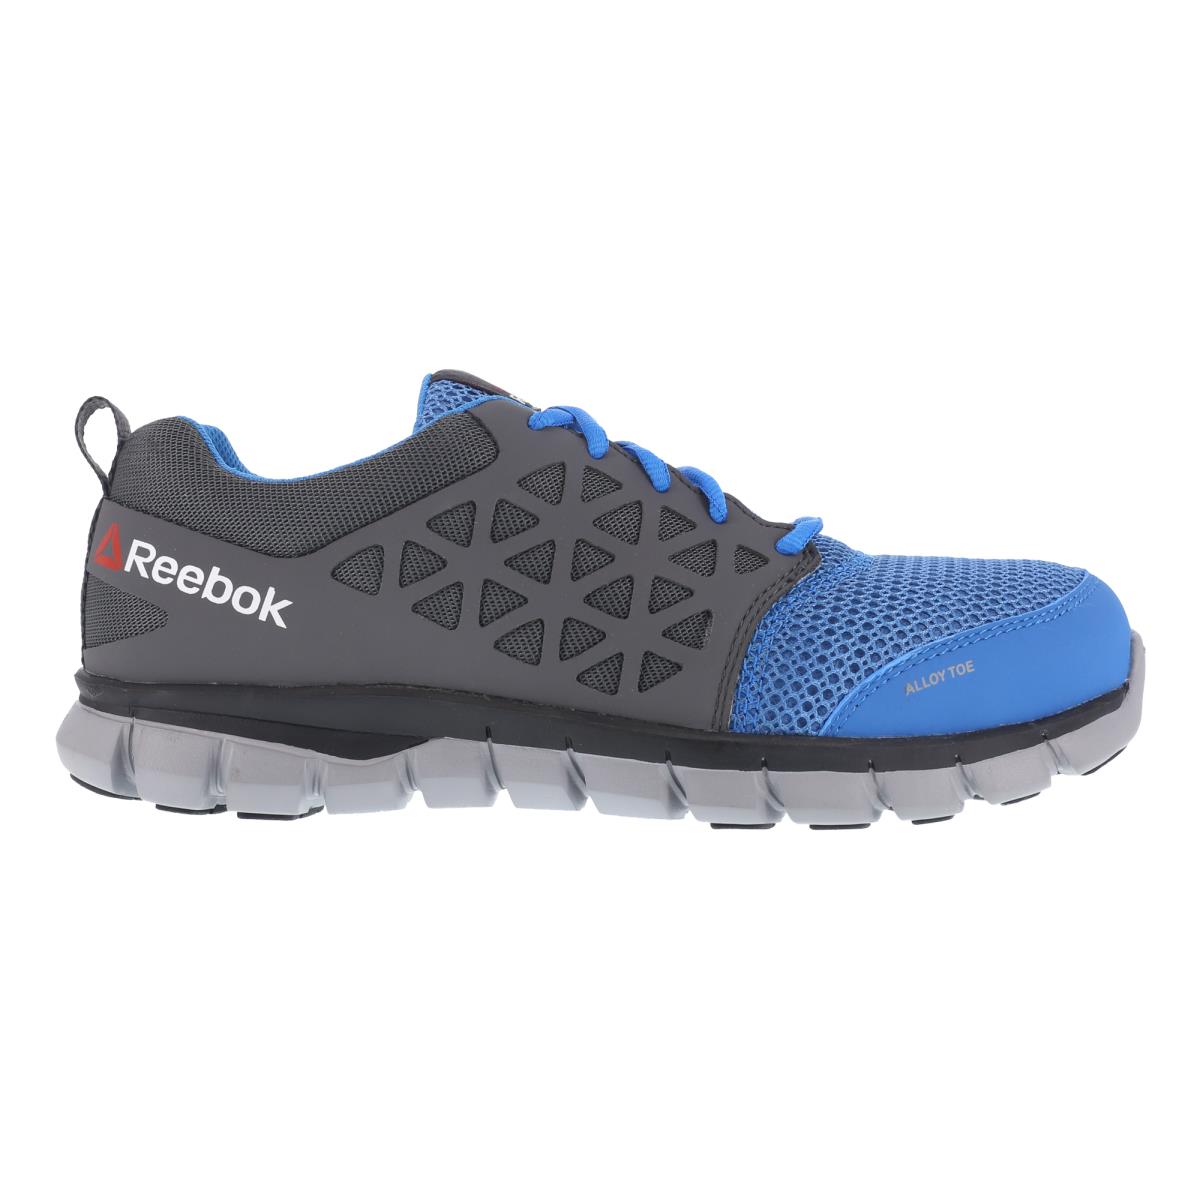 Reebok Womens Blue Mesh Work Shoes AT Oxford Athletic Leather M